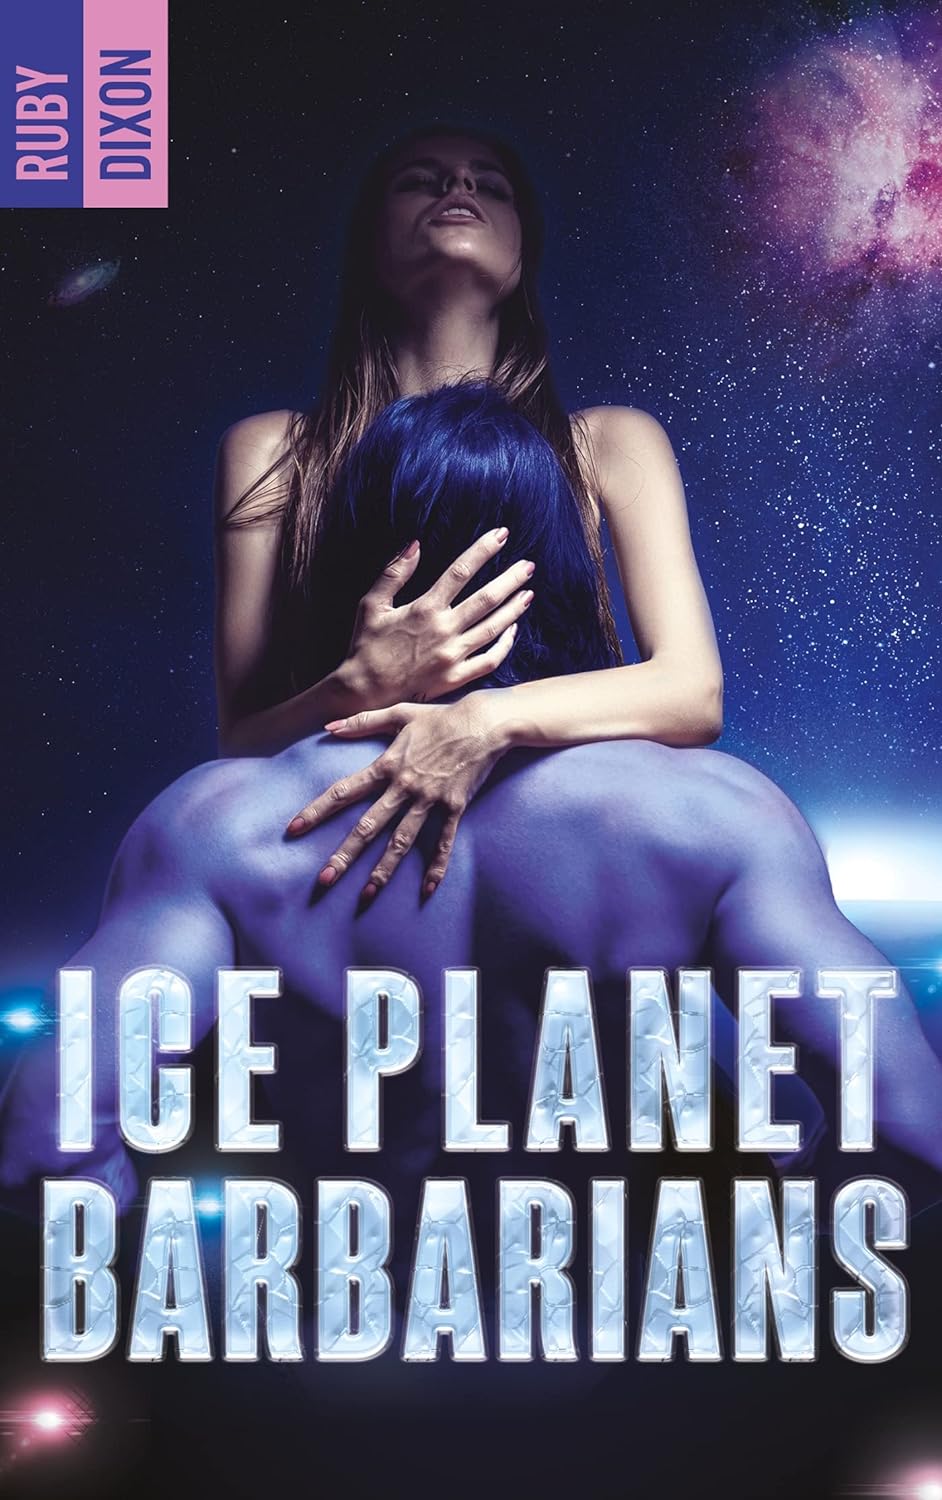 Ice Planet Barbarians – French Edition